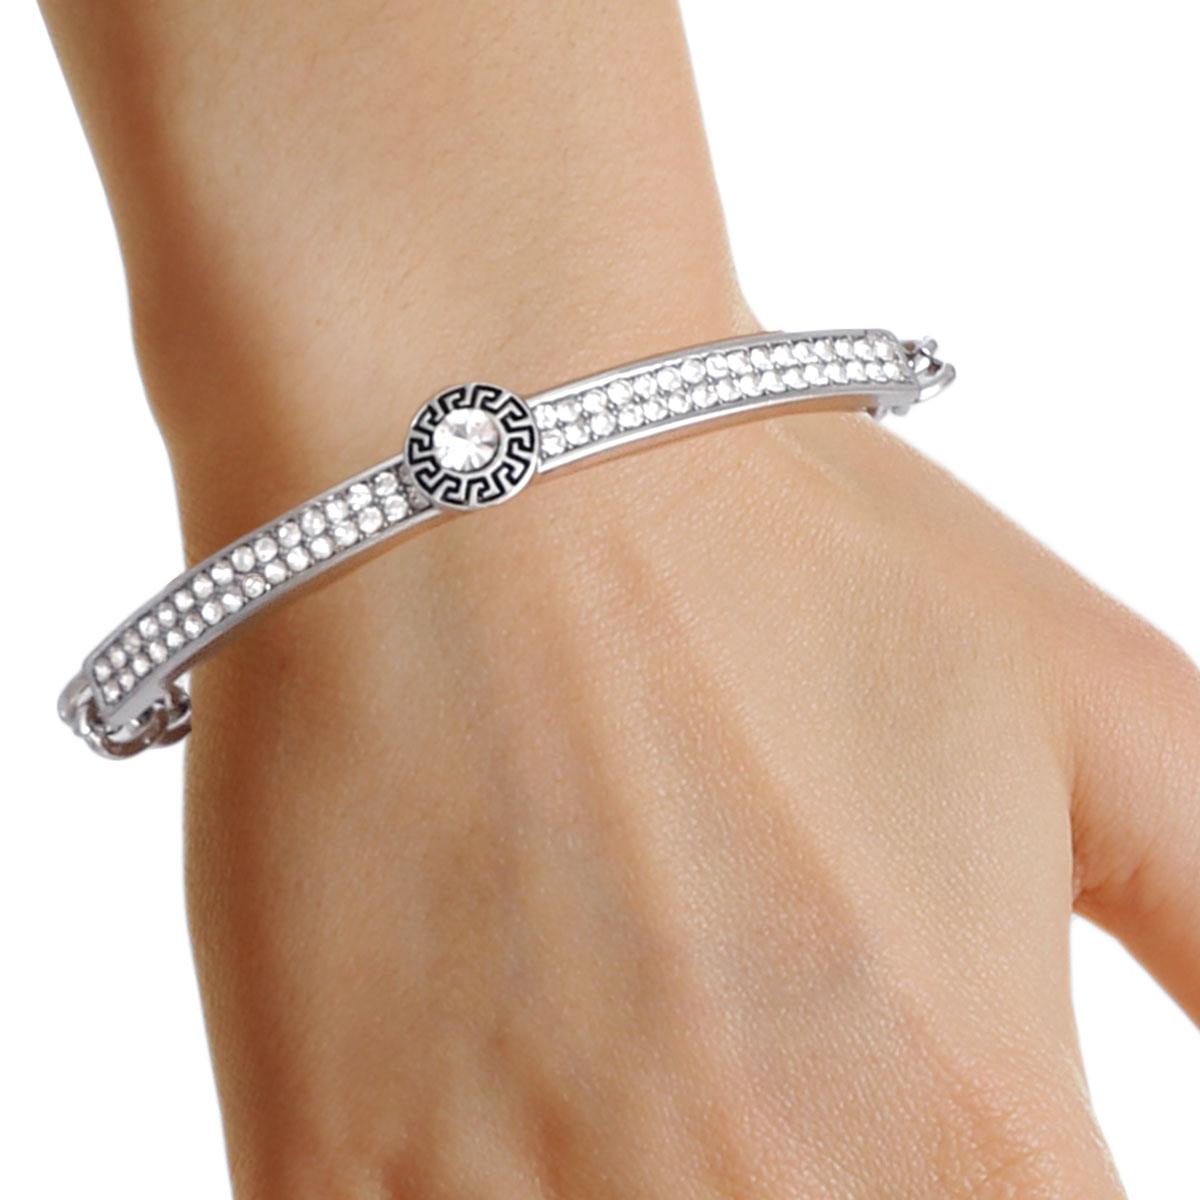 Upgrade Your Style: Silver Half Chain Bangle Bracelet - Shop Now!